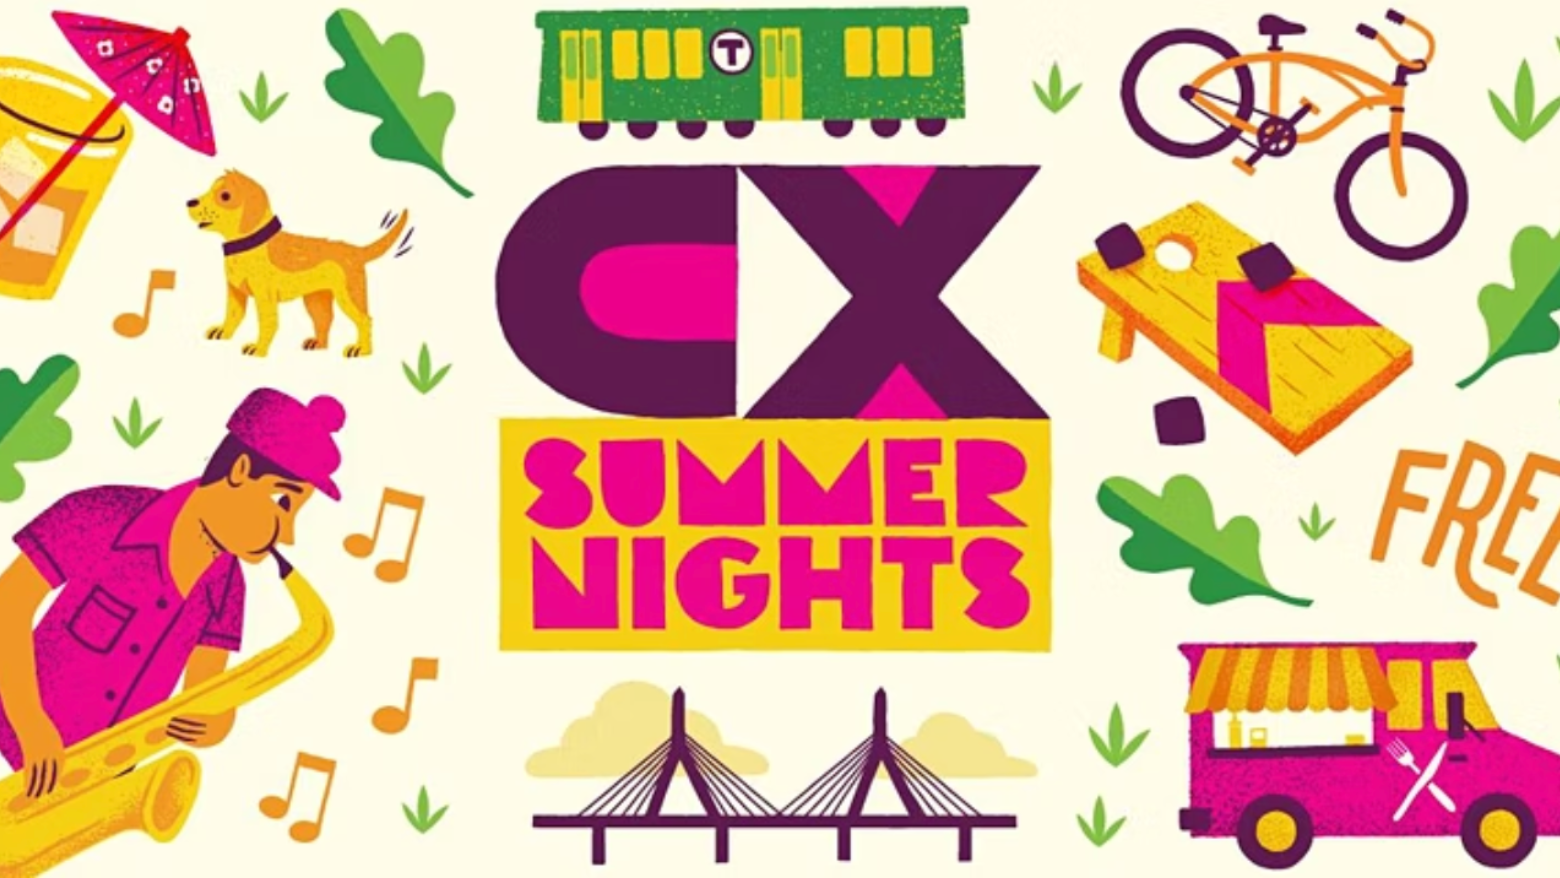 CX Summer Nights Boston Restaurant News and Events